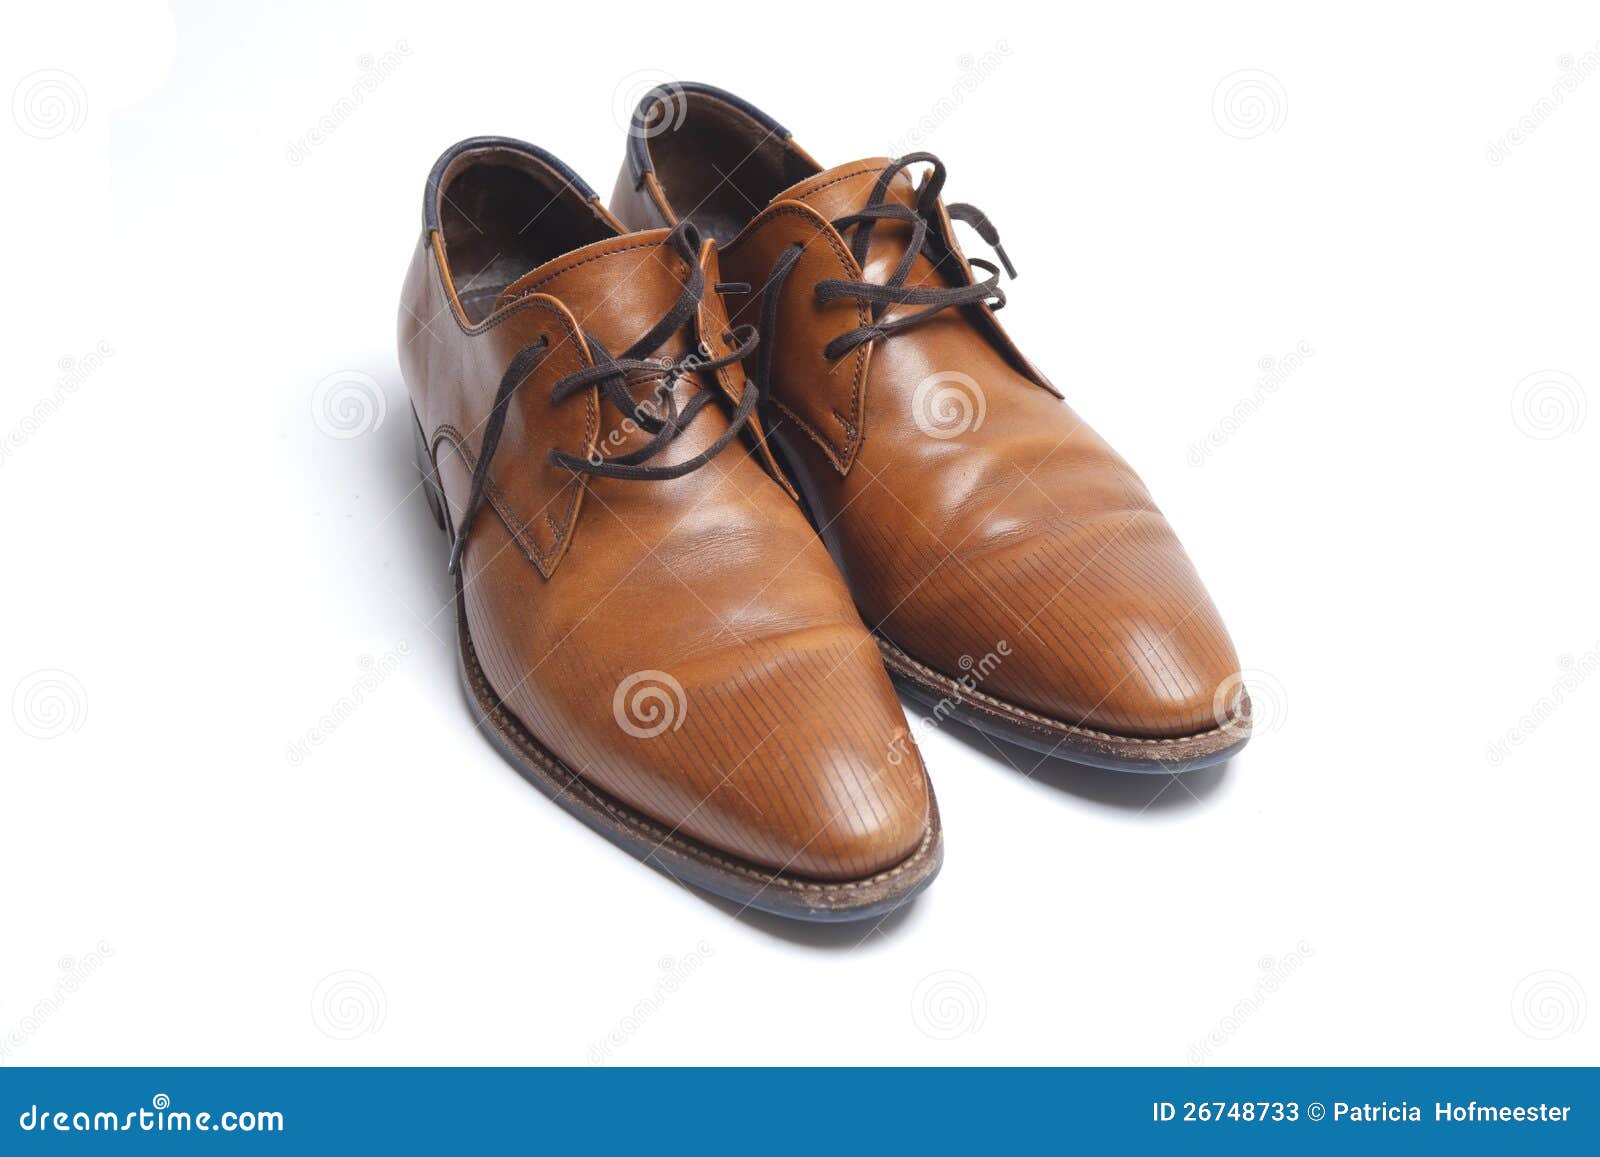 Brown mens shoes stock image. Image of lace, elegance - 26748733